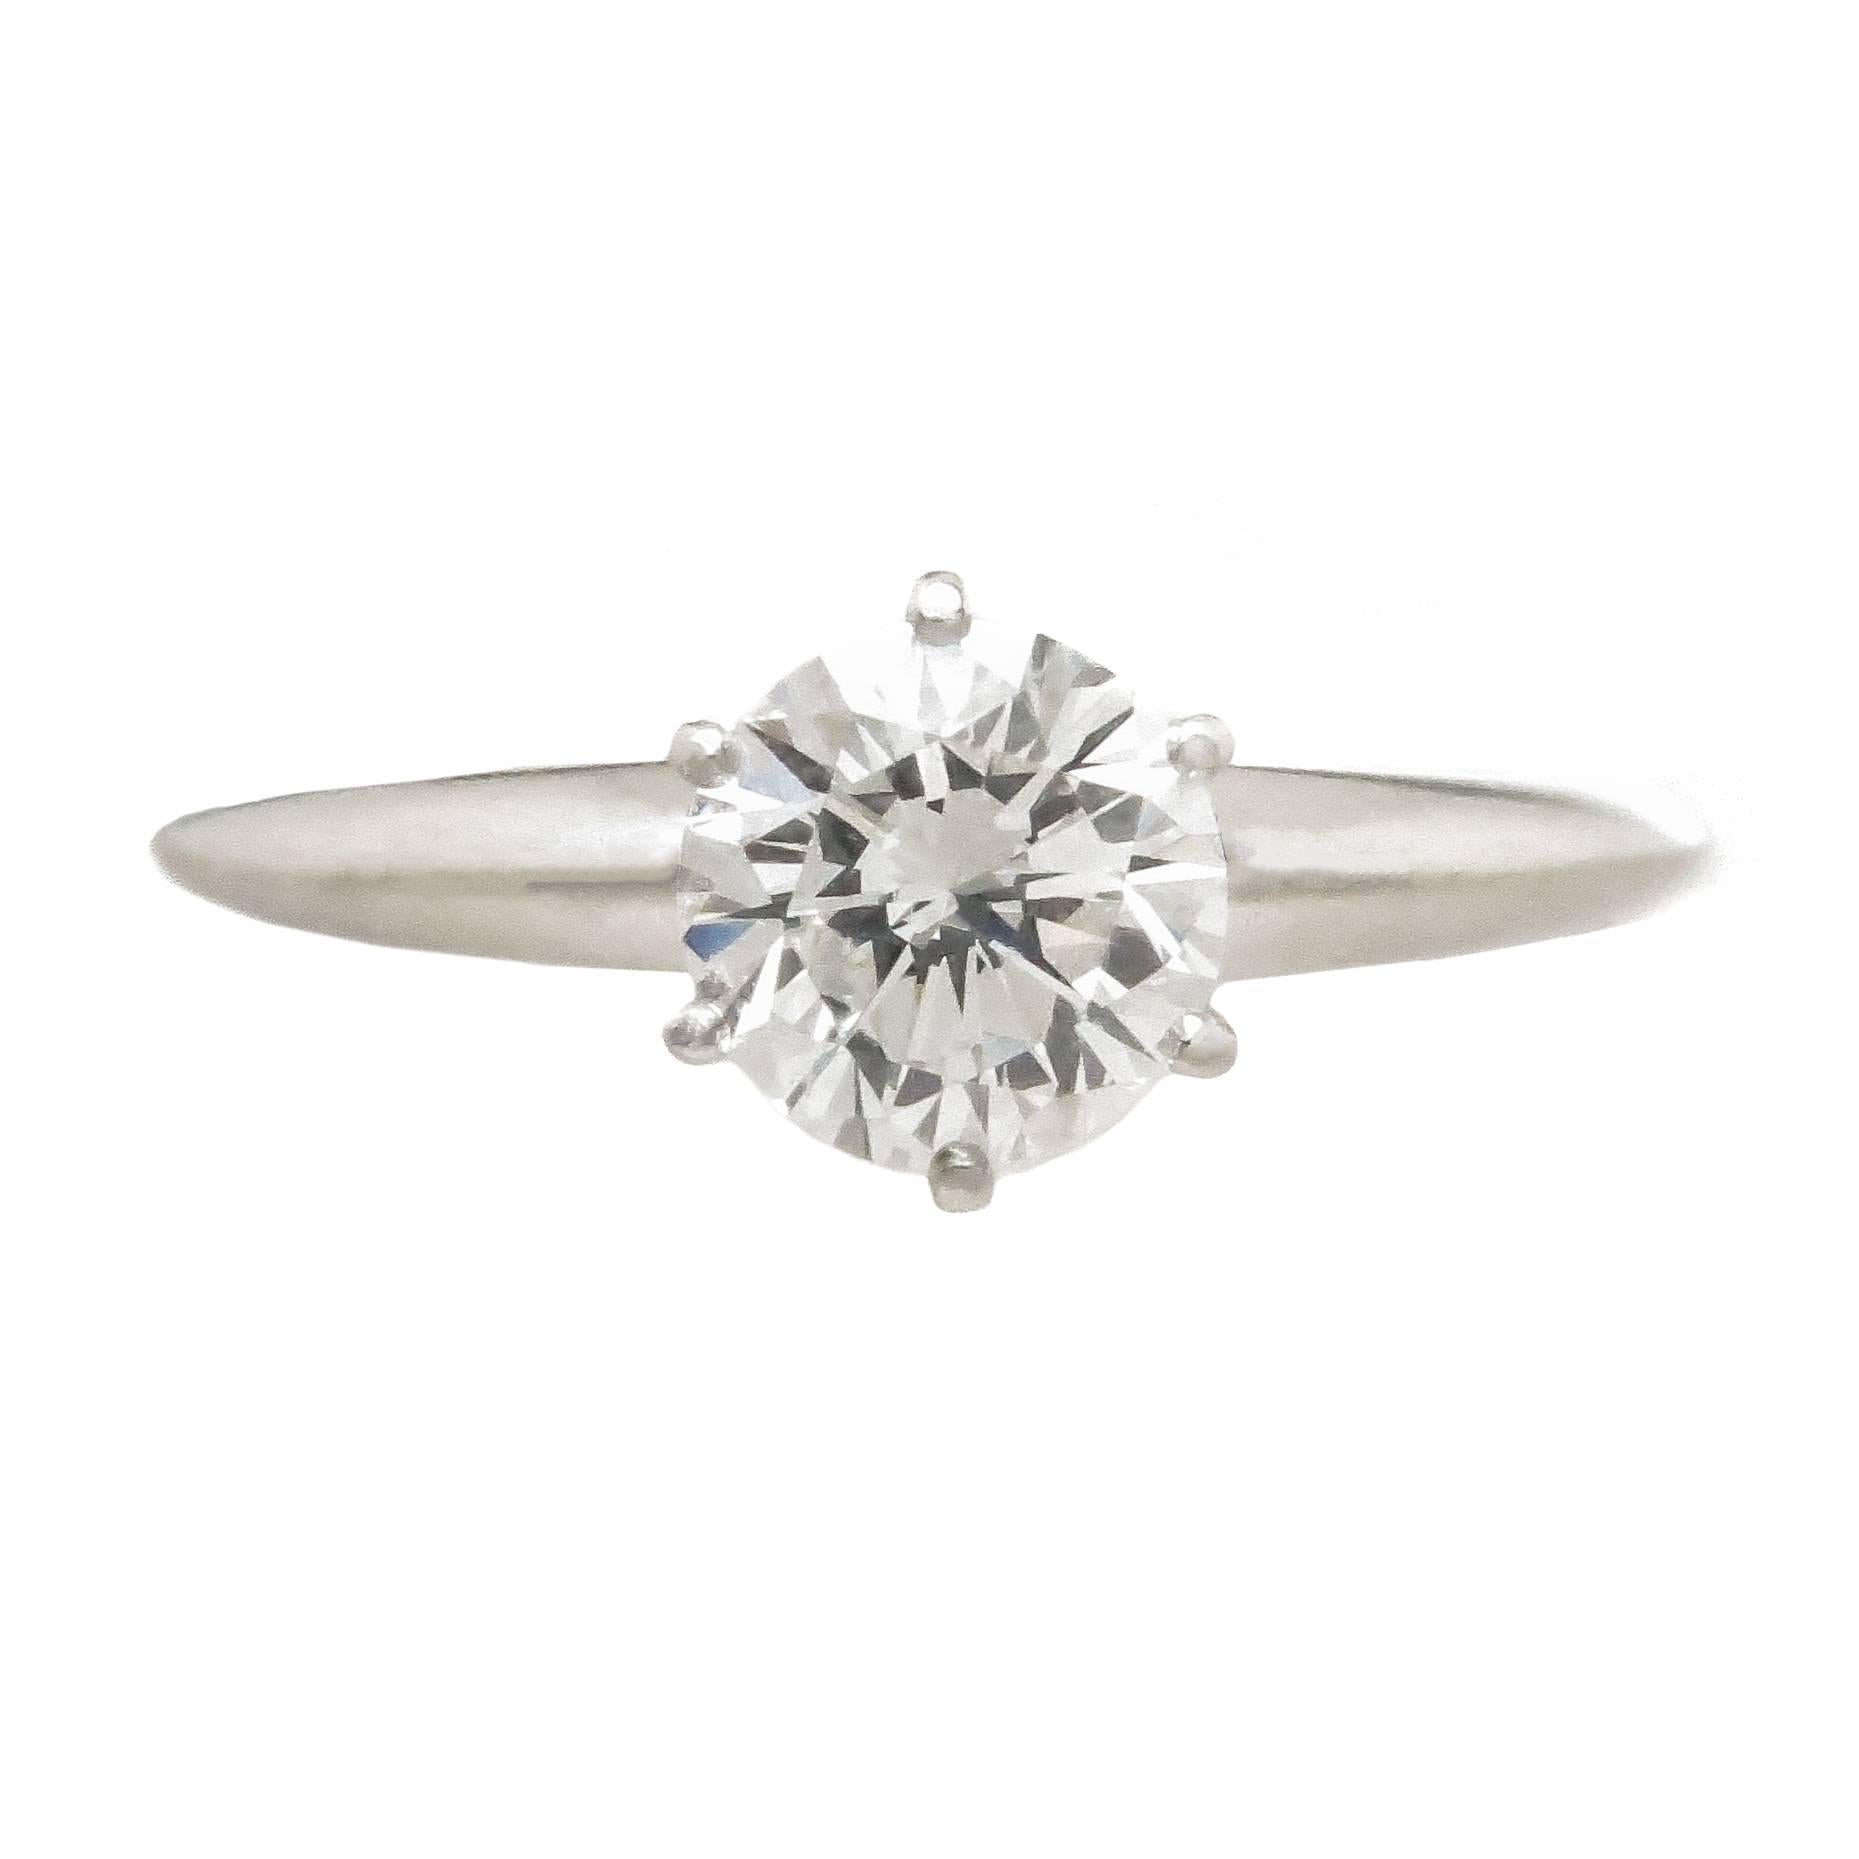 Tiffany & Co. Platinum and Diamond Solitaire Engagement Ring, 1972